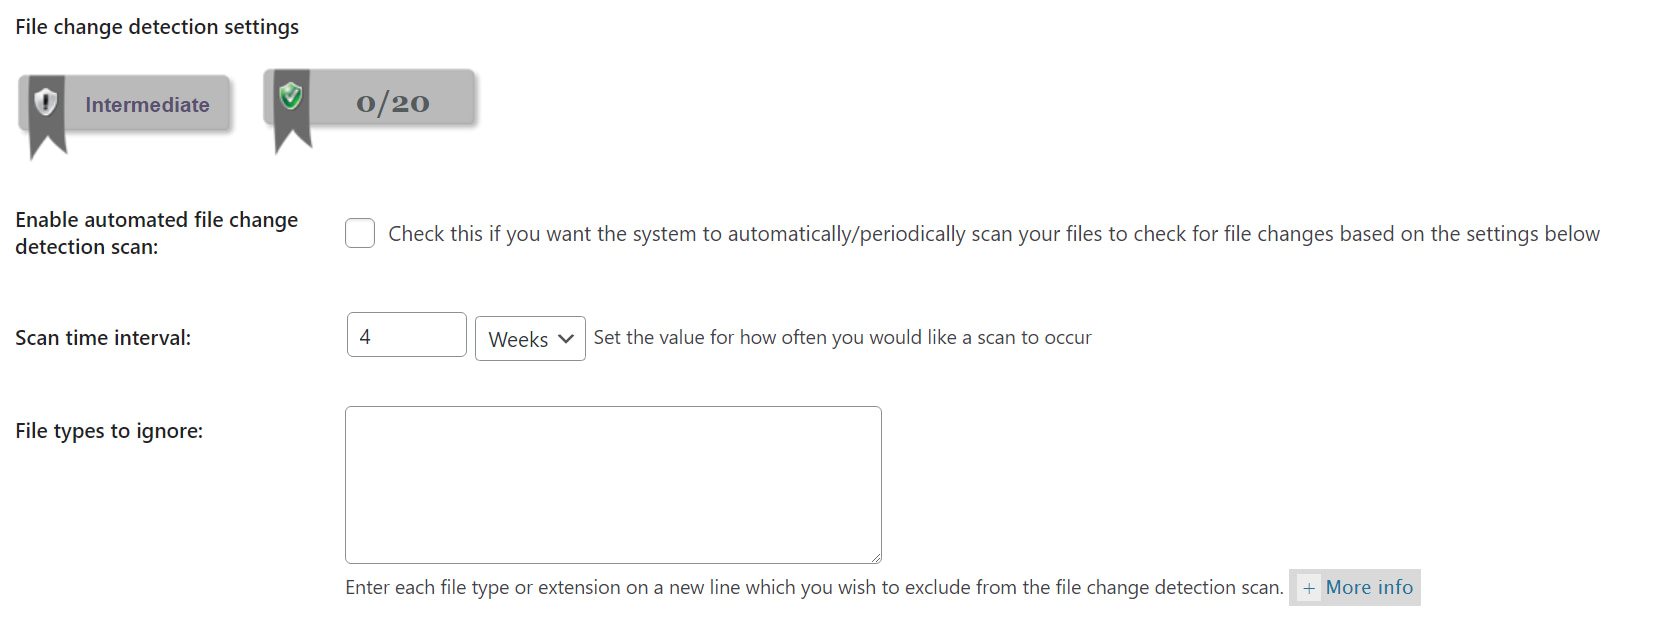 Configuring the file change detection settings in All in One WordPress Security.